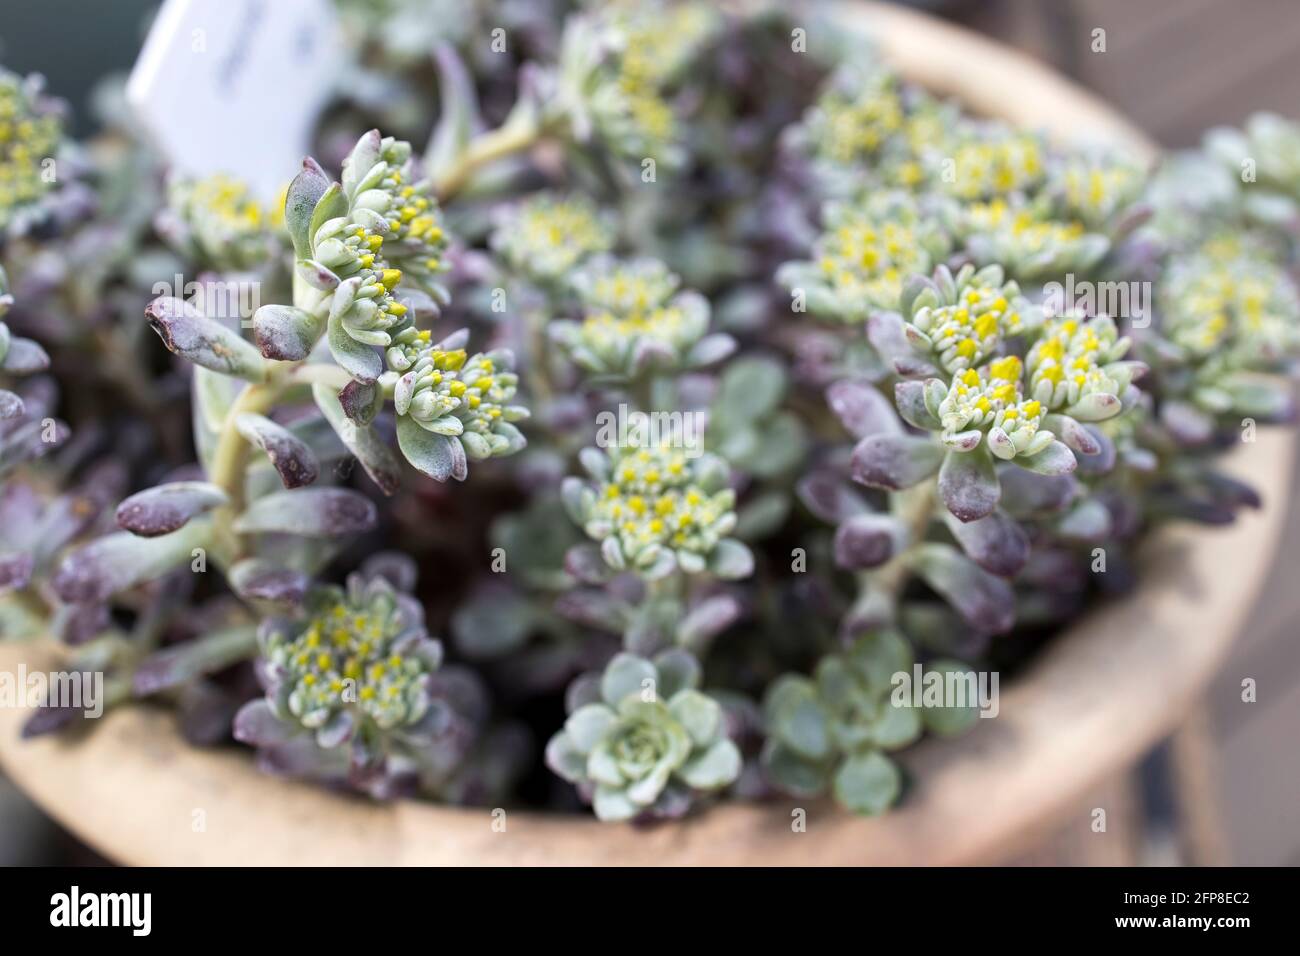 Sedum of pale green color with yellow flowers in a clay pot. Fragment of decoration of garden Stock Photo